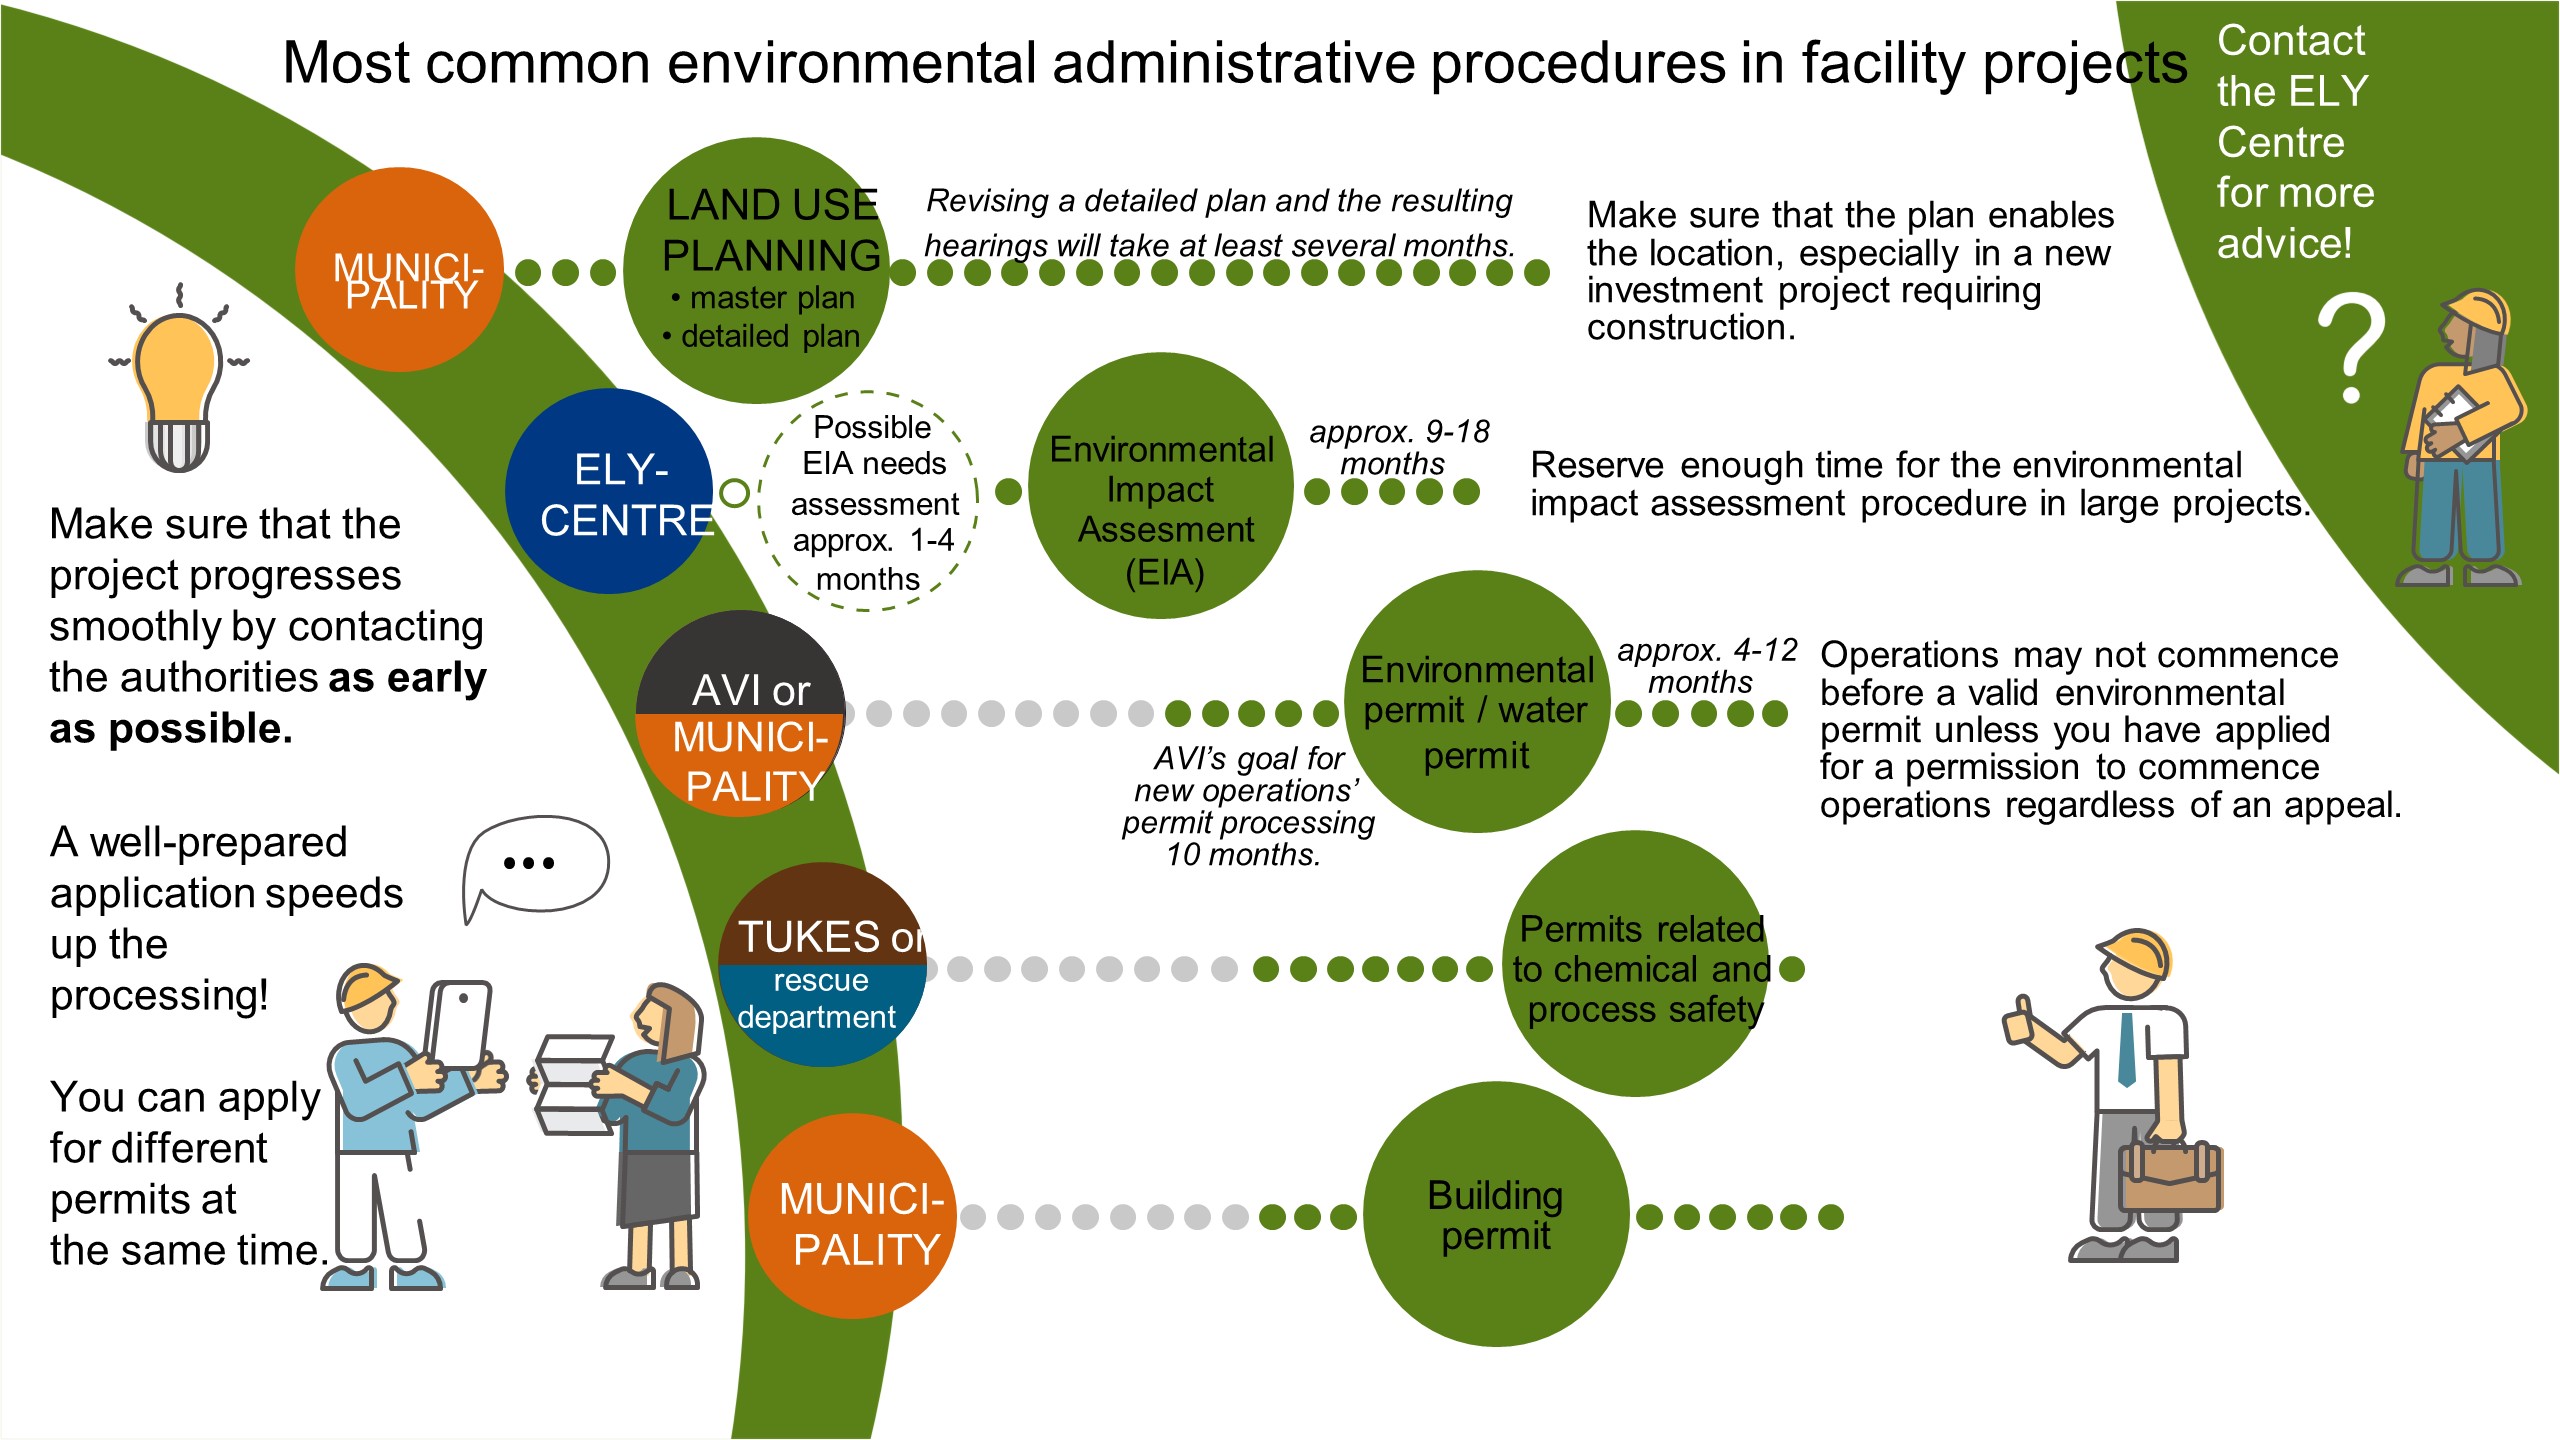 The most common environmental administrative procedures in facility projects are planning, environmental impact assessment, environmental or water permits, permits related to chemical and process safety, and building permits. Make sure that your project progresses smoothly by contacting the authorities as early as possible. A well-prepared application speeds up processing. You can apply for different permits at the same time. The ELY Centre will advise you on the procedures.   The municipality is responsible for zoning (general plan and local detailed plan). Revising a local detailed plan and the related hearings will take at least several months. Especially in new investment projects requiring construction, it is essential to ensure that the zoning plan allows for the placement of the project. The ELY Centre carries out the needs assessment for the environmental impact assessment (EIA). The EIA procedure lasts about 9 to 18 months. Large-scale projects have to reserve enough time for the procedure. The Regional State Administrative Agency or the municipality is responsible for the environmental and water permit. The Regional State Administrative Agency’s goal for processing new operations’ permits is 10 months. Operations may not commence before obtaining a valid environmental permit or a permission to commence operations regardless of an appeal. TUKES or the rescue department is responsible for permits related to chemical and process safety. The municipality is responsible for building permits.